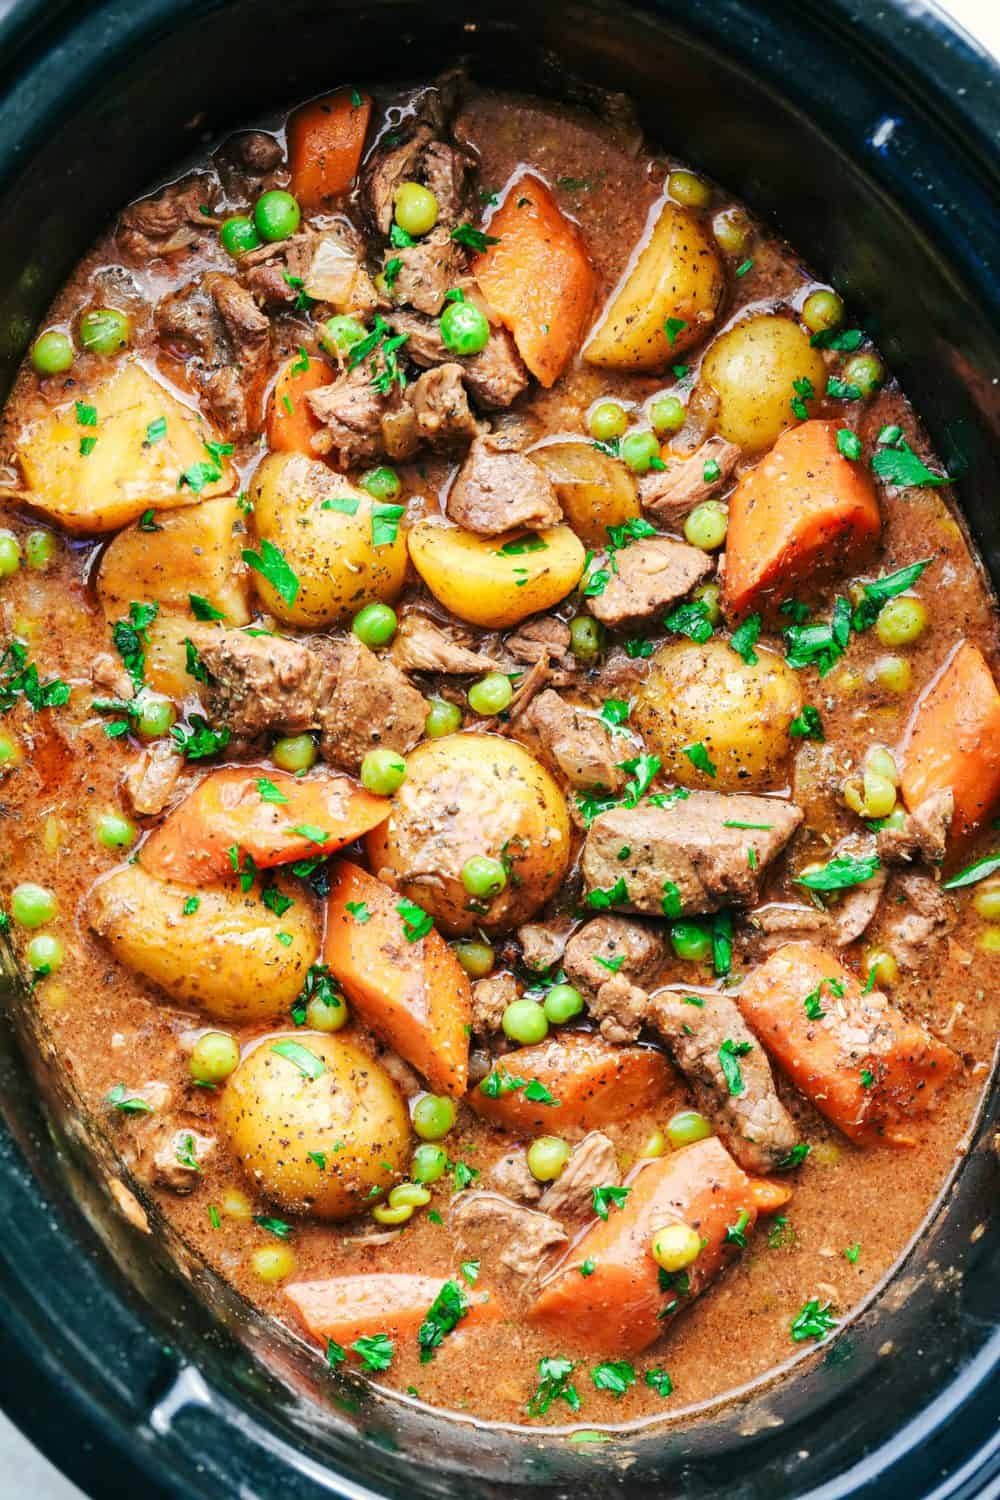 https://therecipecritic.com/wp-content/uploads/2017/09/slow_cooker_beef_stew-1-of-1.jpg